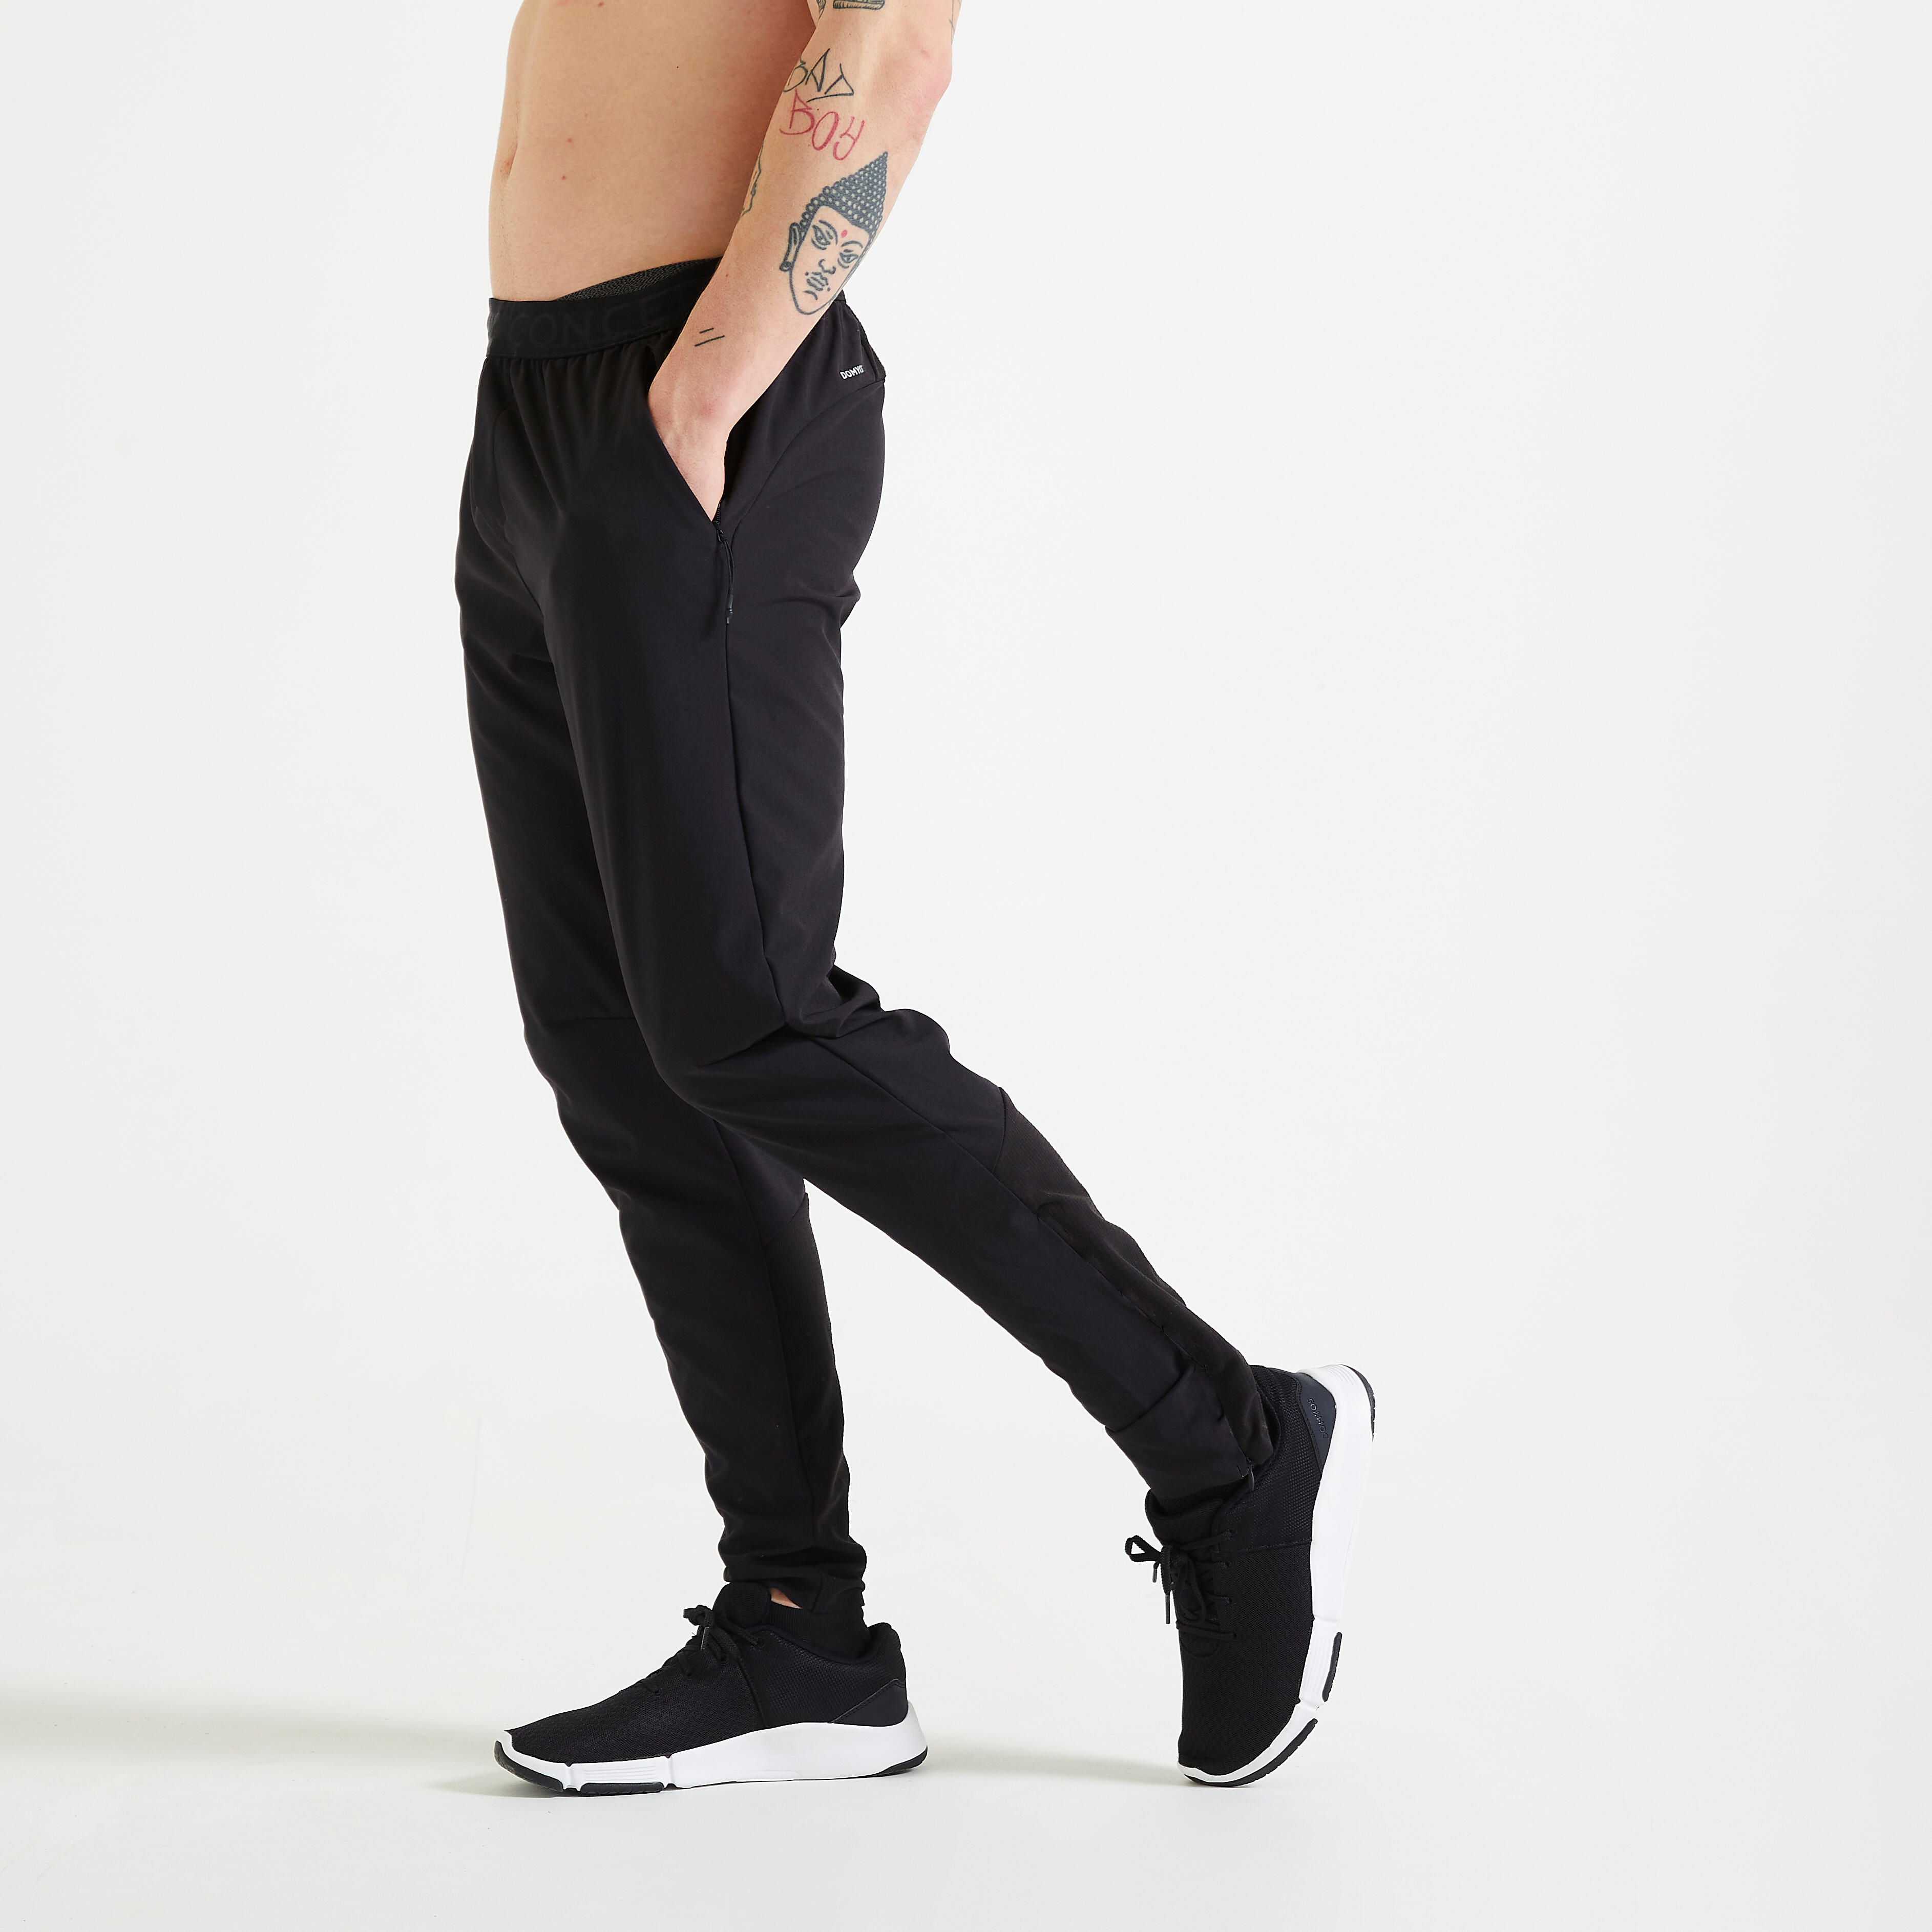 The 15 Best Workout Pants for Men to Buy in 2022  Top Mens Workout Pants